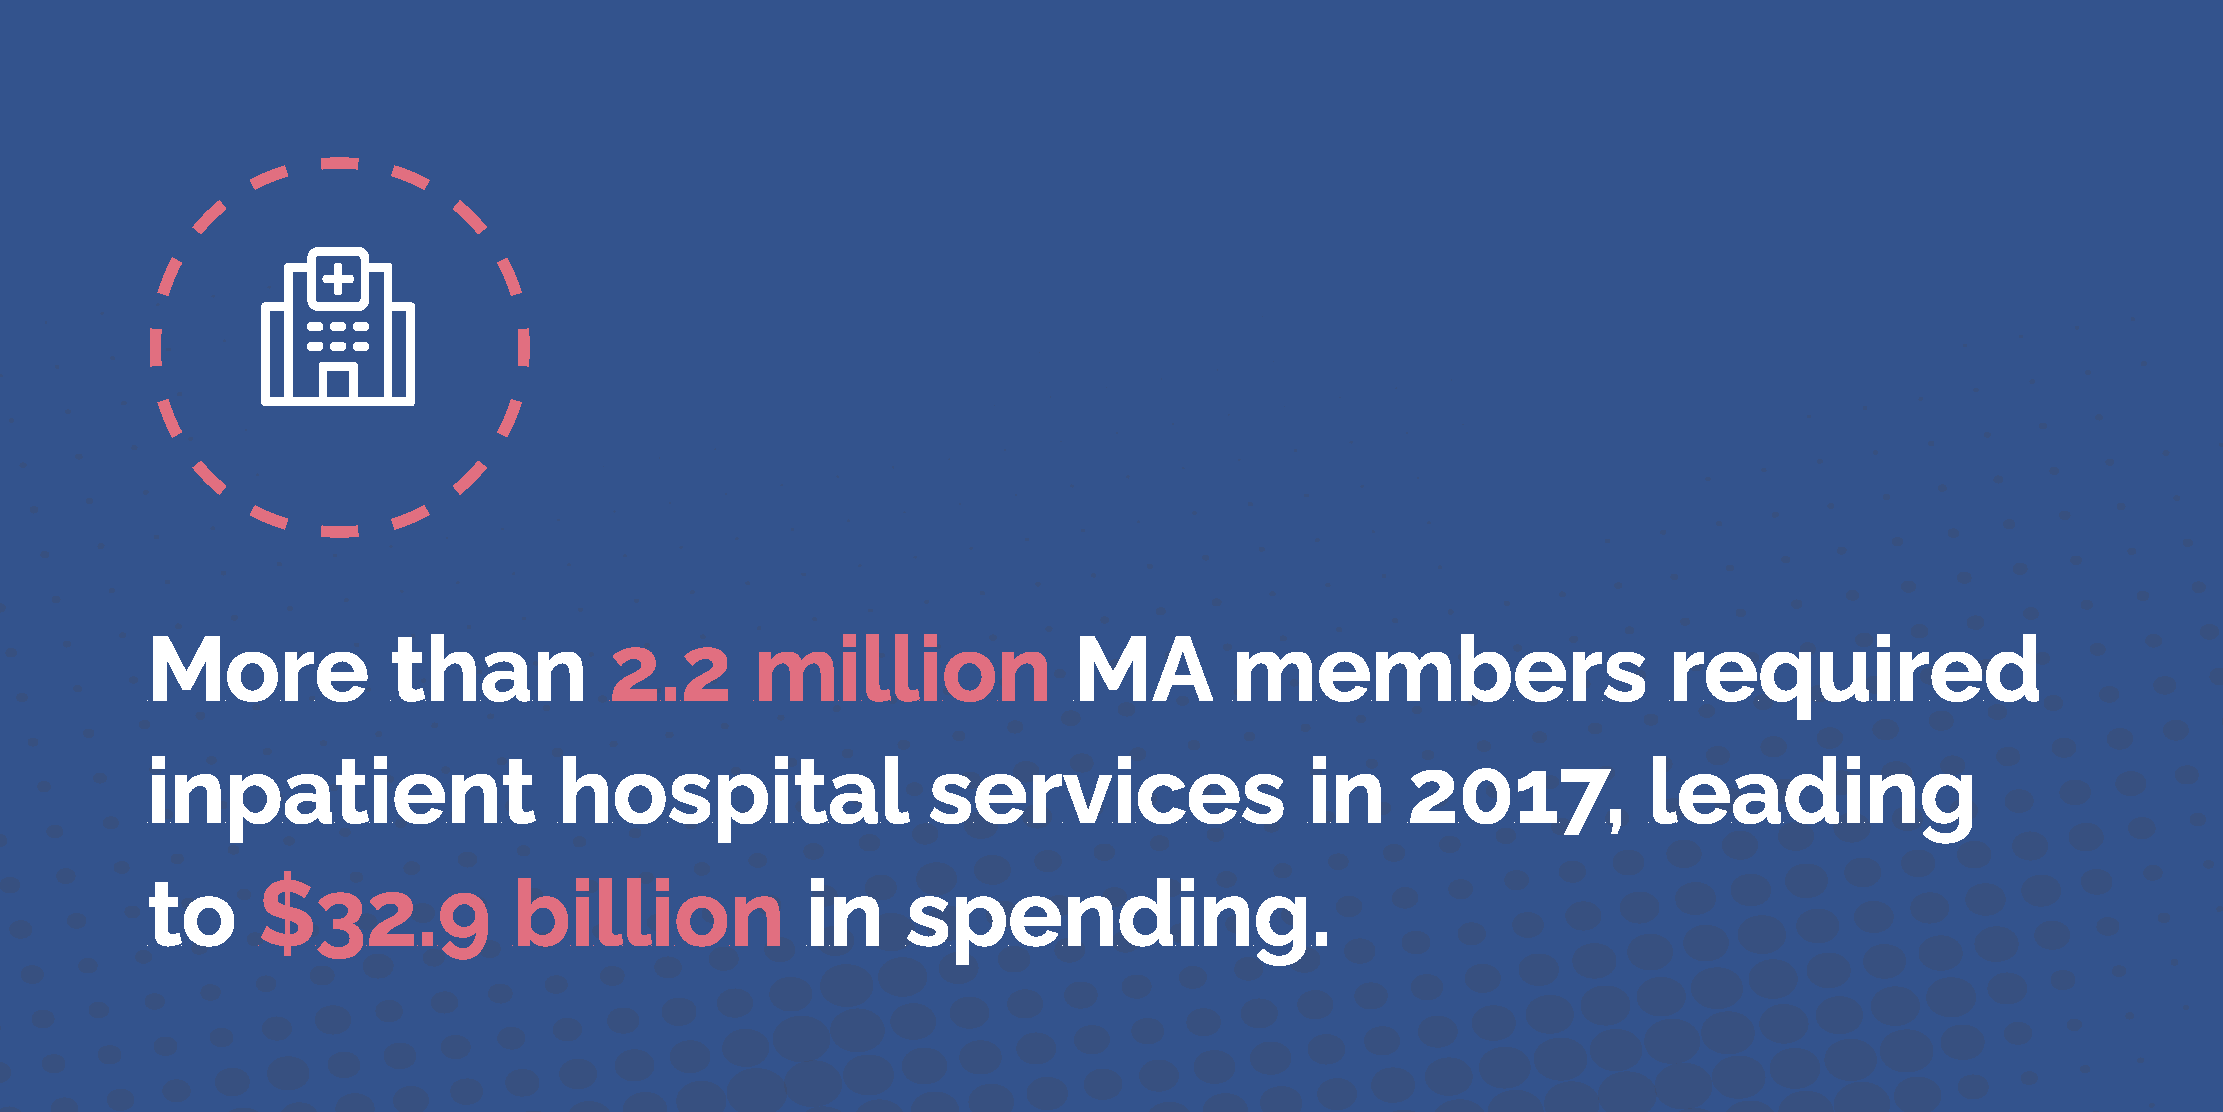 Callout: More than 2.2 million MA members required inpatient hospital services in 2017, leading to $32.9 billion in spending.